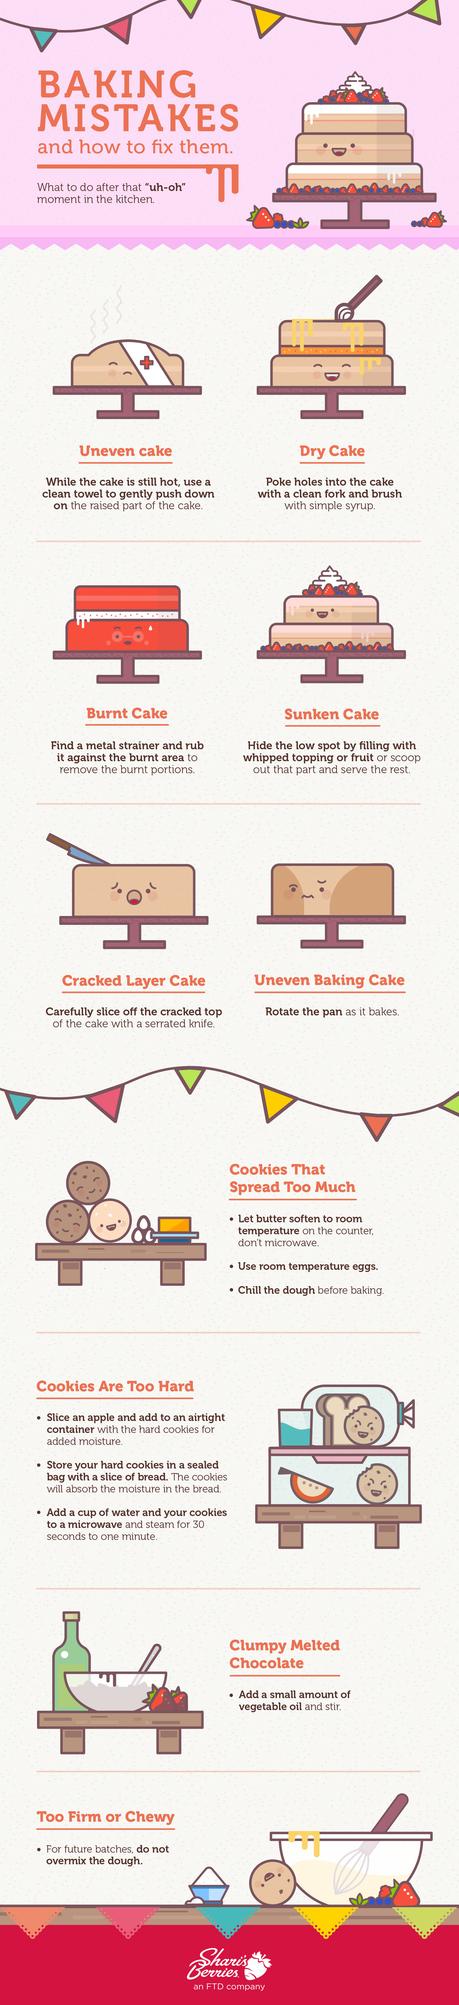 Image: how to fix baking baking mistakes